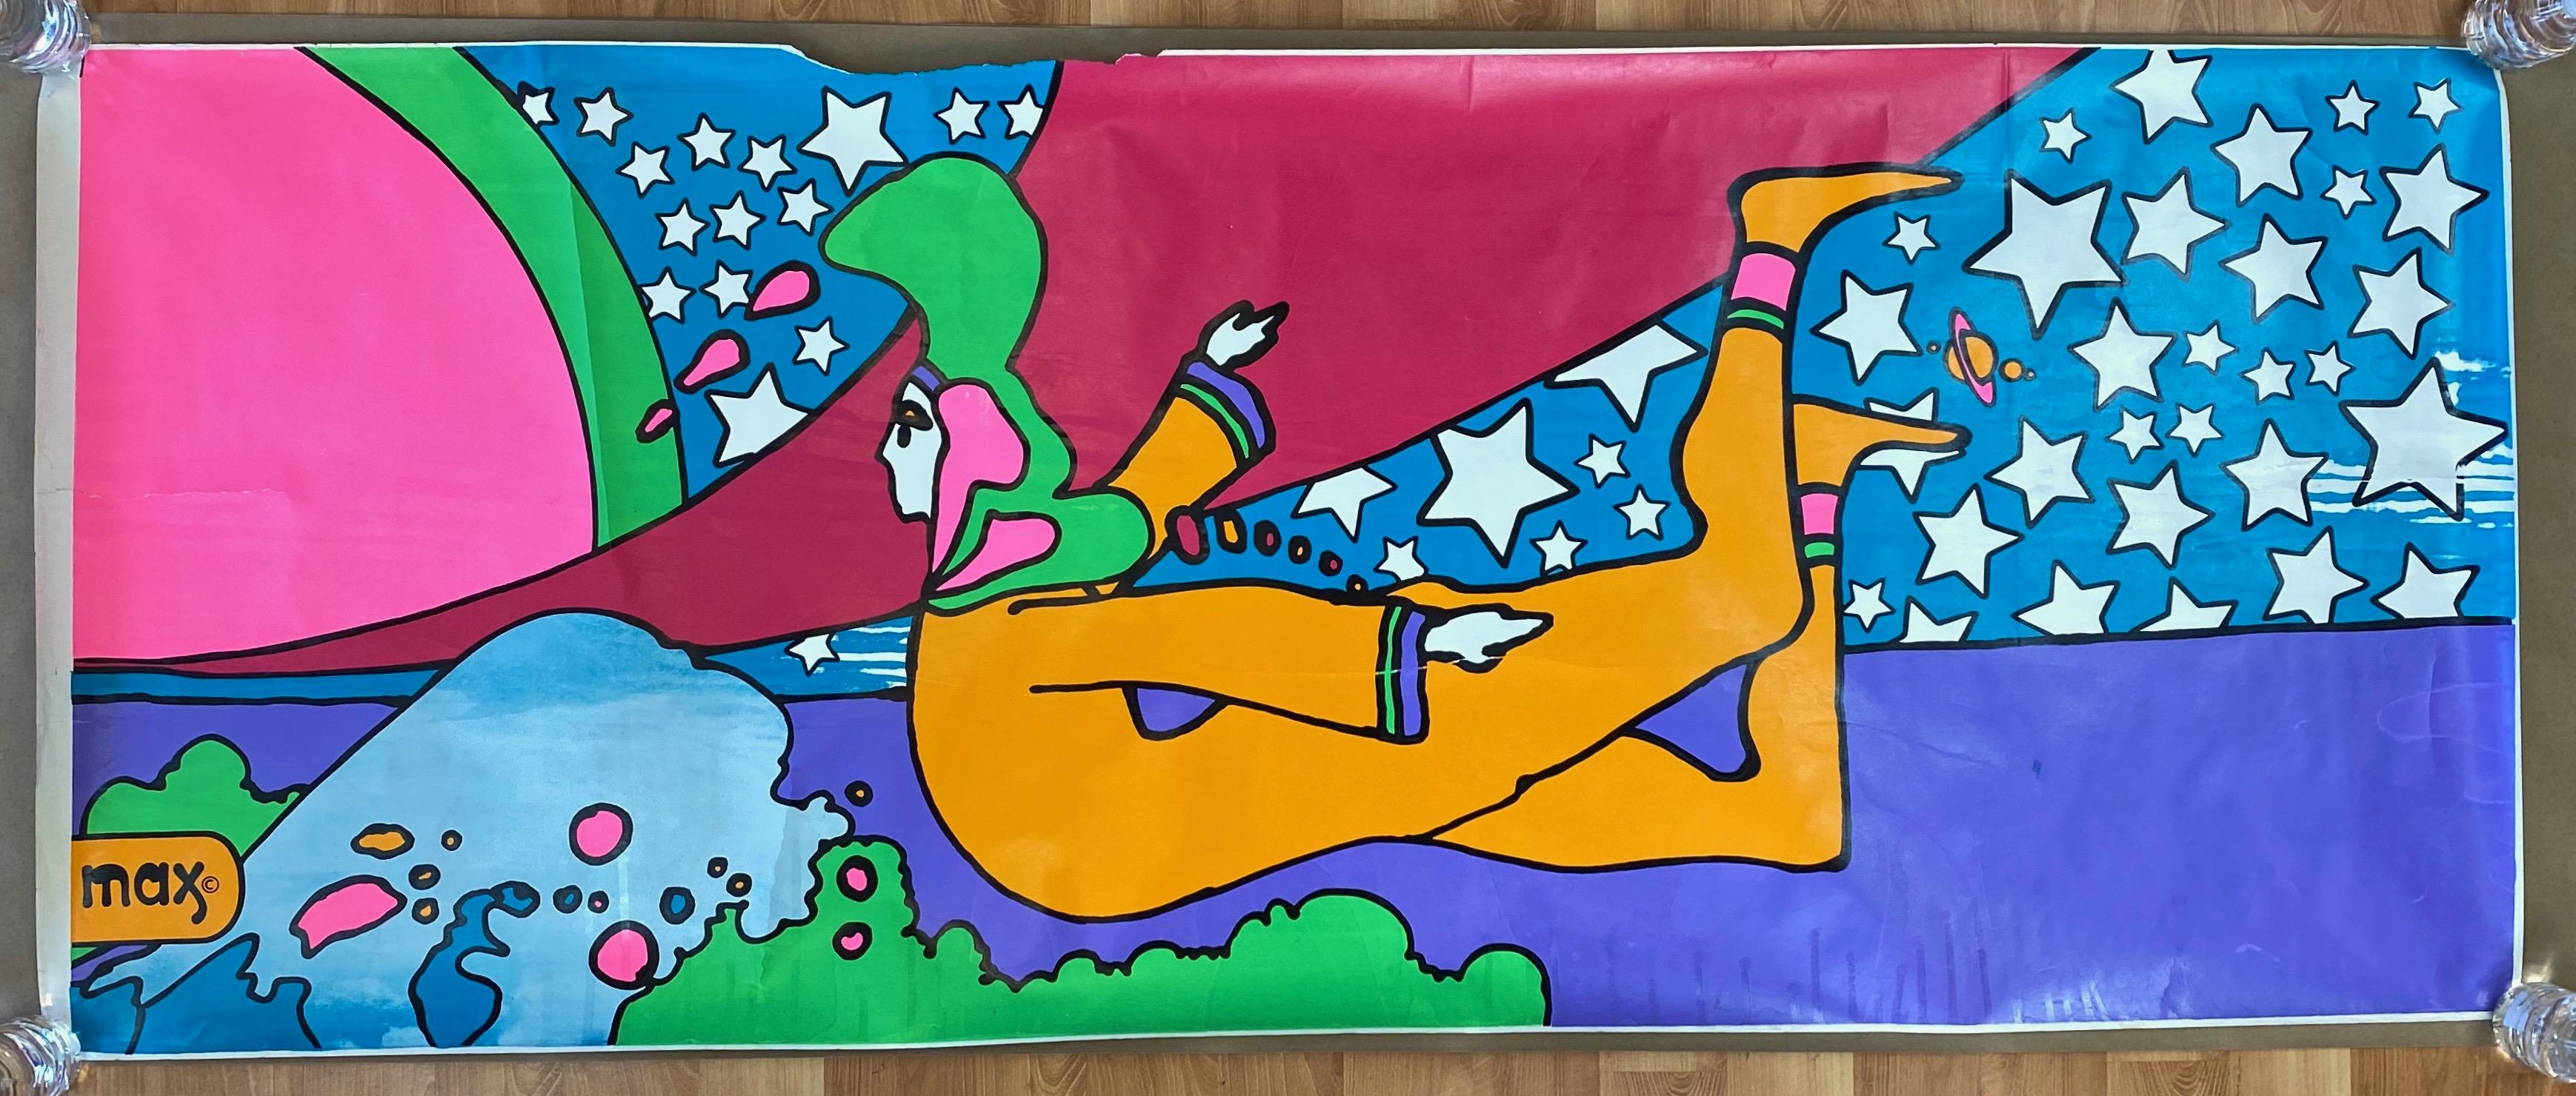 Mid-Century Modern Peter Max 12-Foot-Wide Serigraph for 1970 de Young Museum Solo Exhibition ‘A’ For Sale